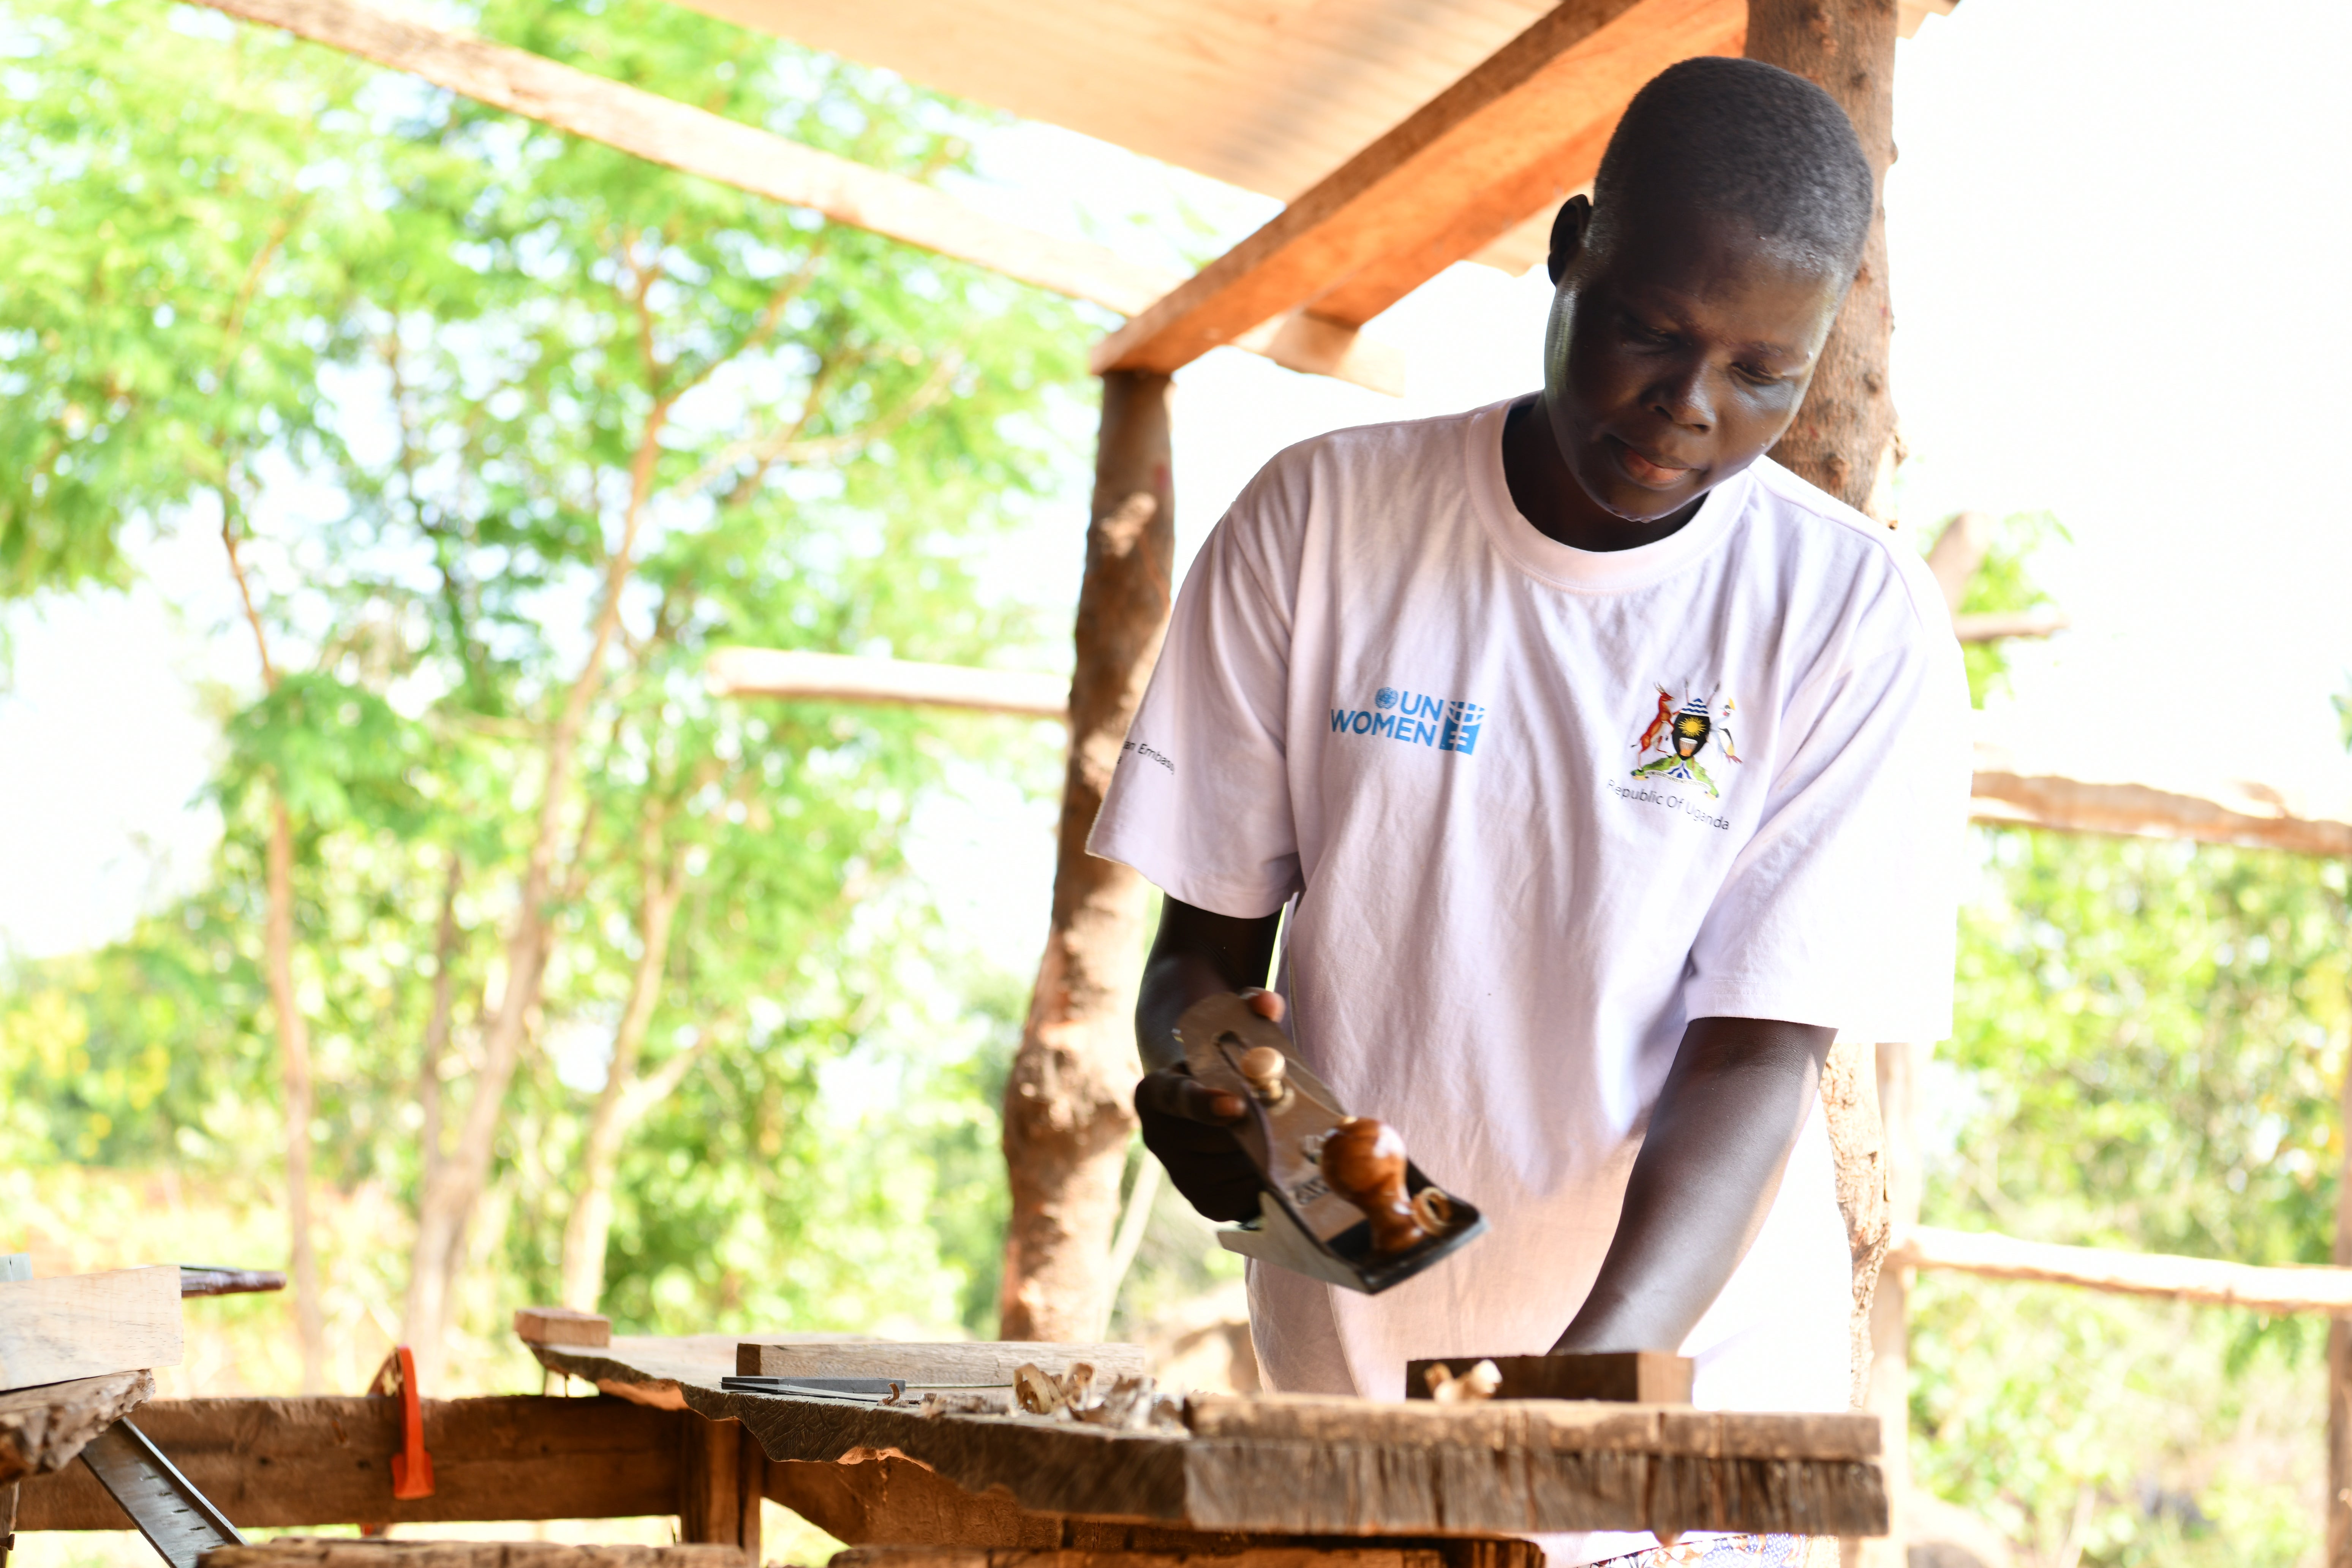 Annette Luka at a carpentry workshop in her community